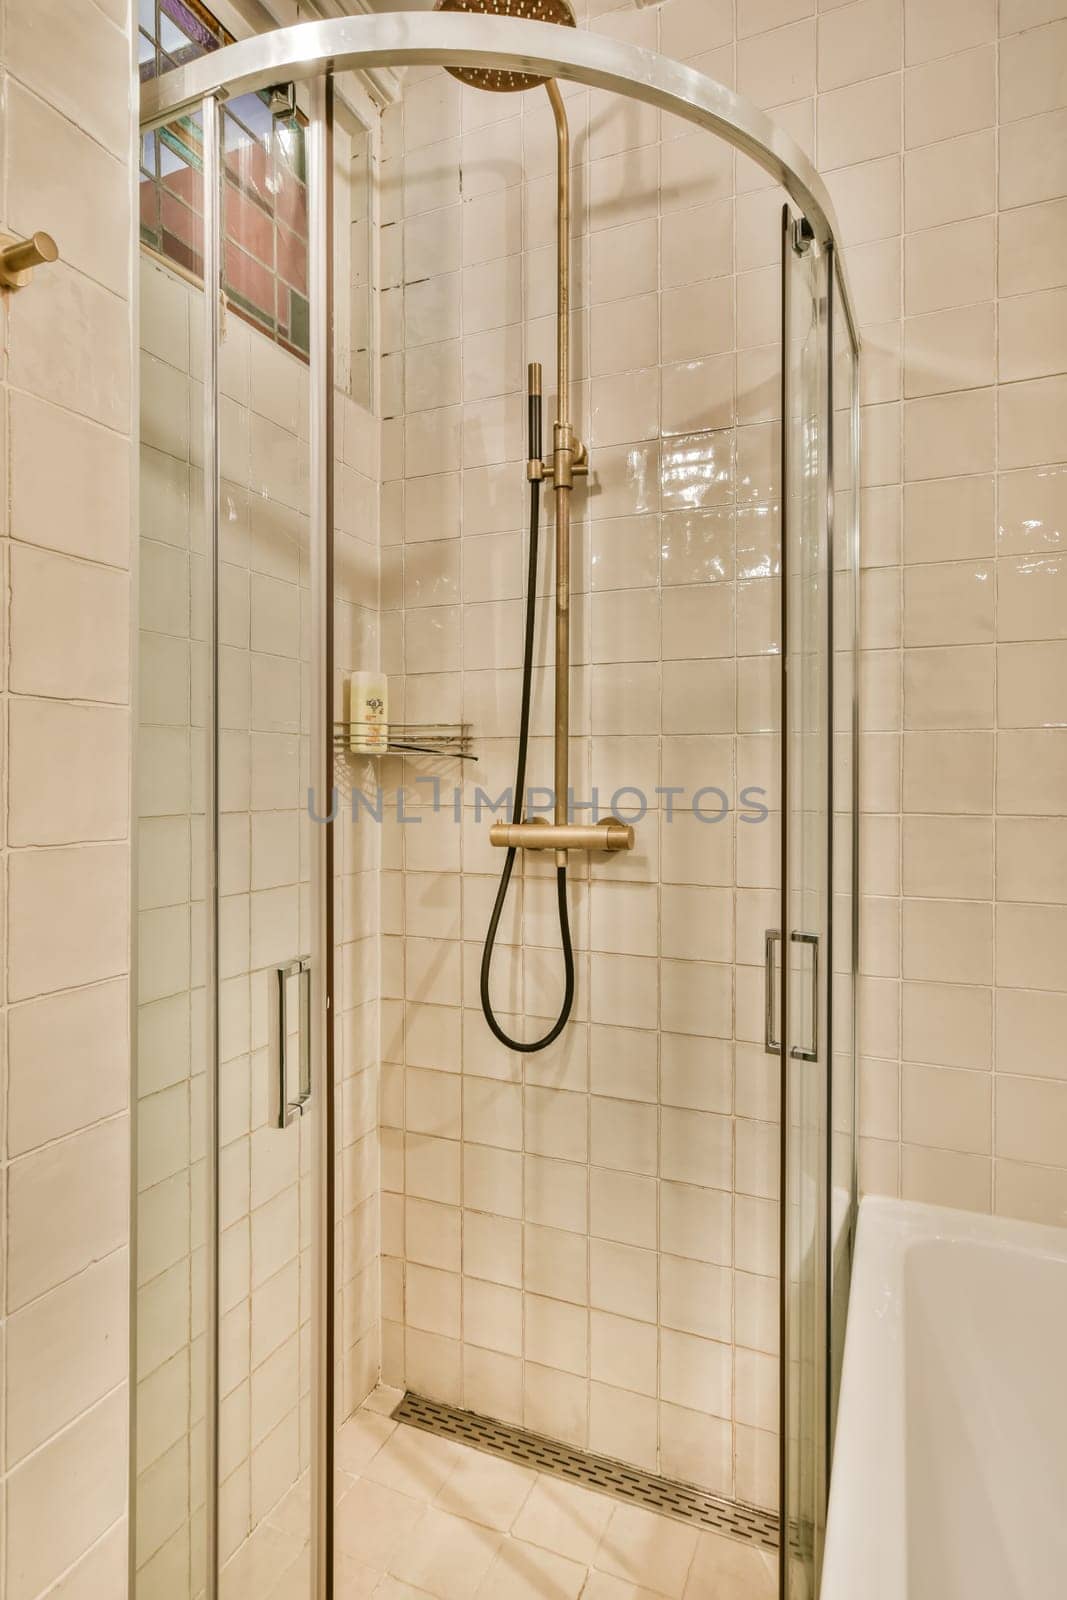 a bathroom with a glass shower door and tiled walls in the corner to the left is a white bathtub on the right side